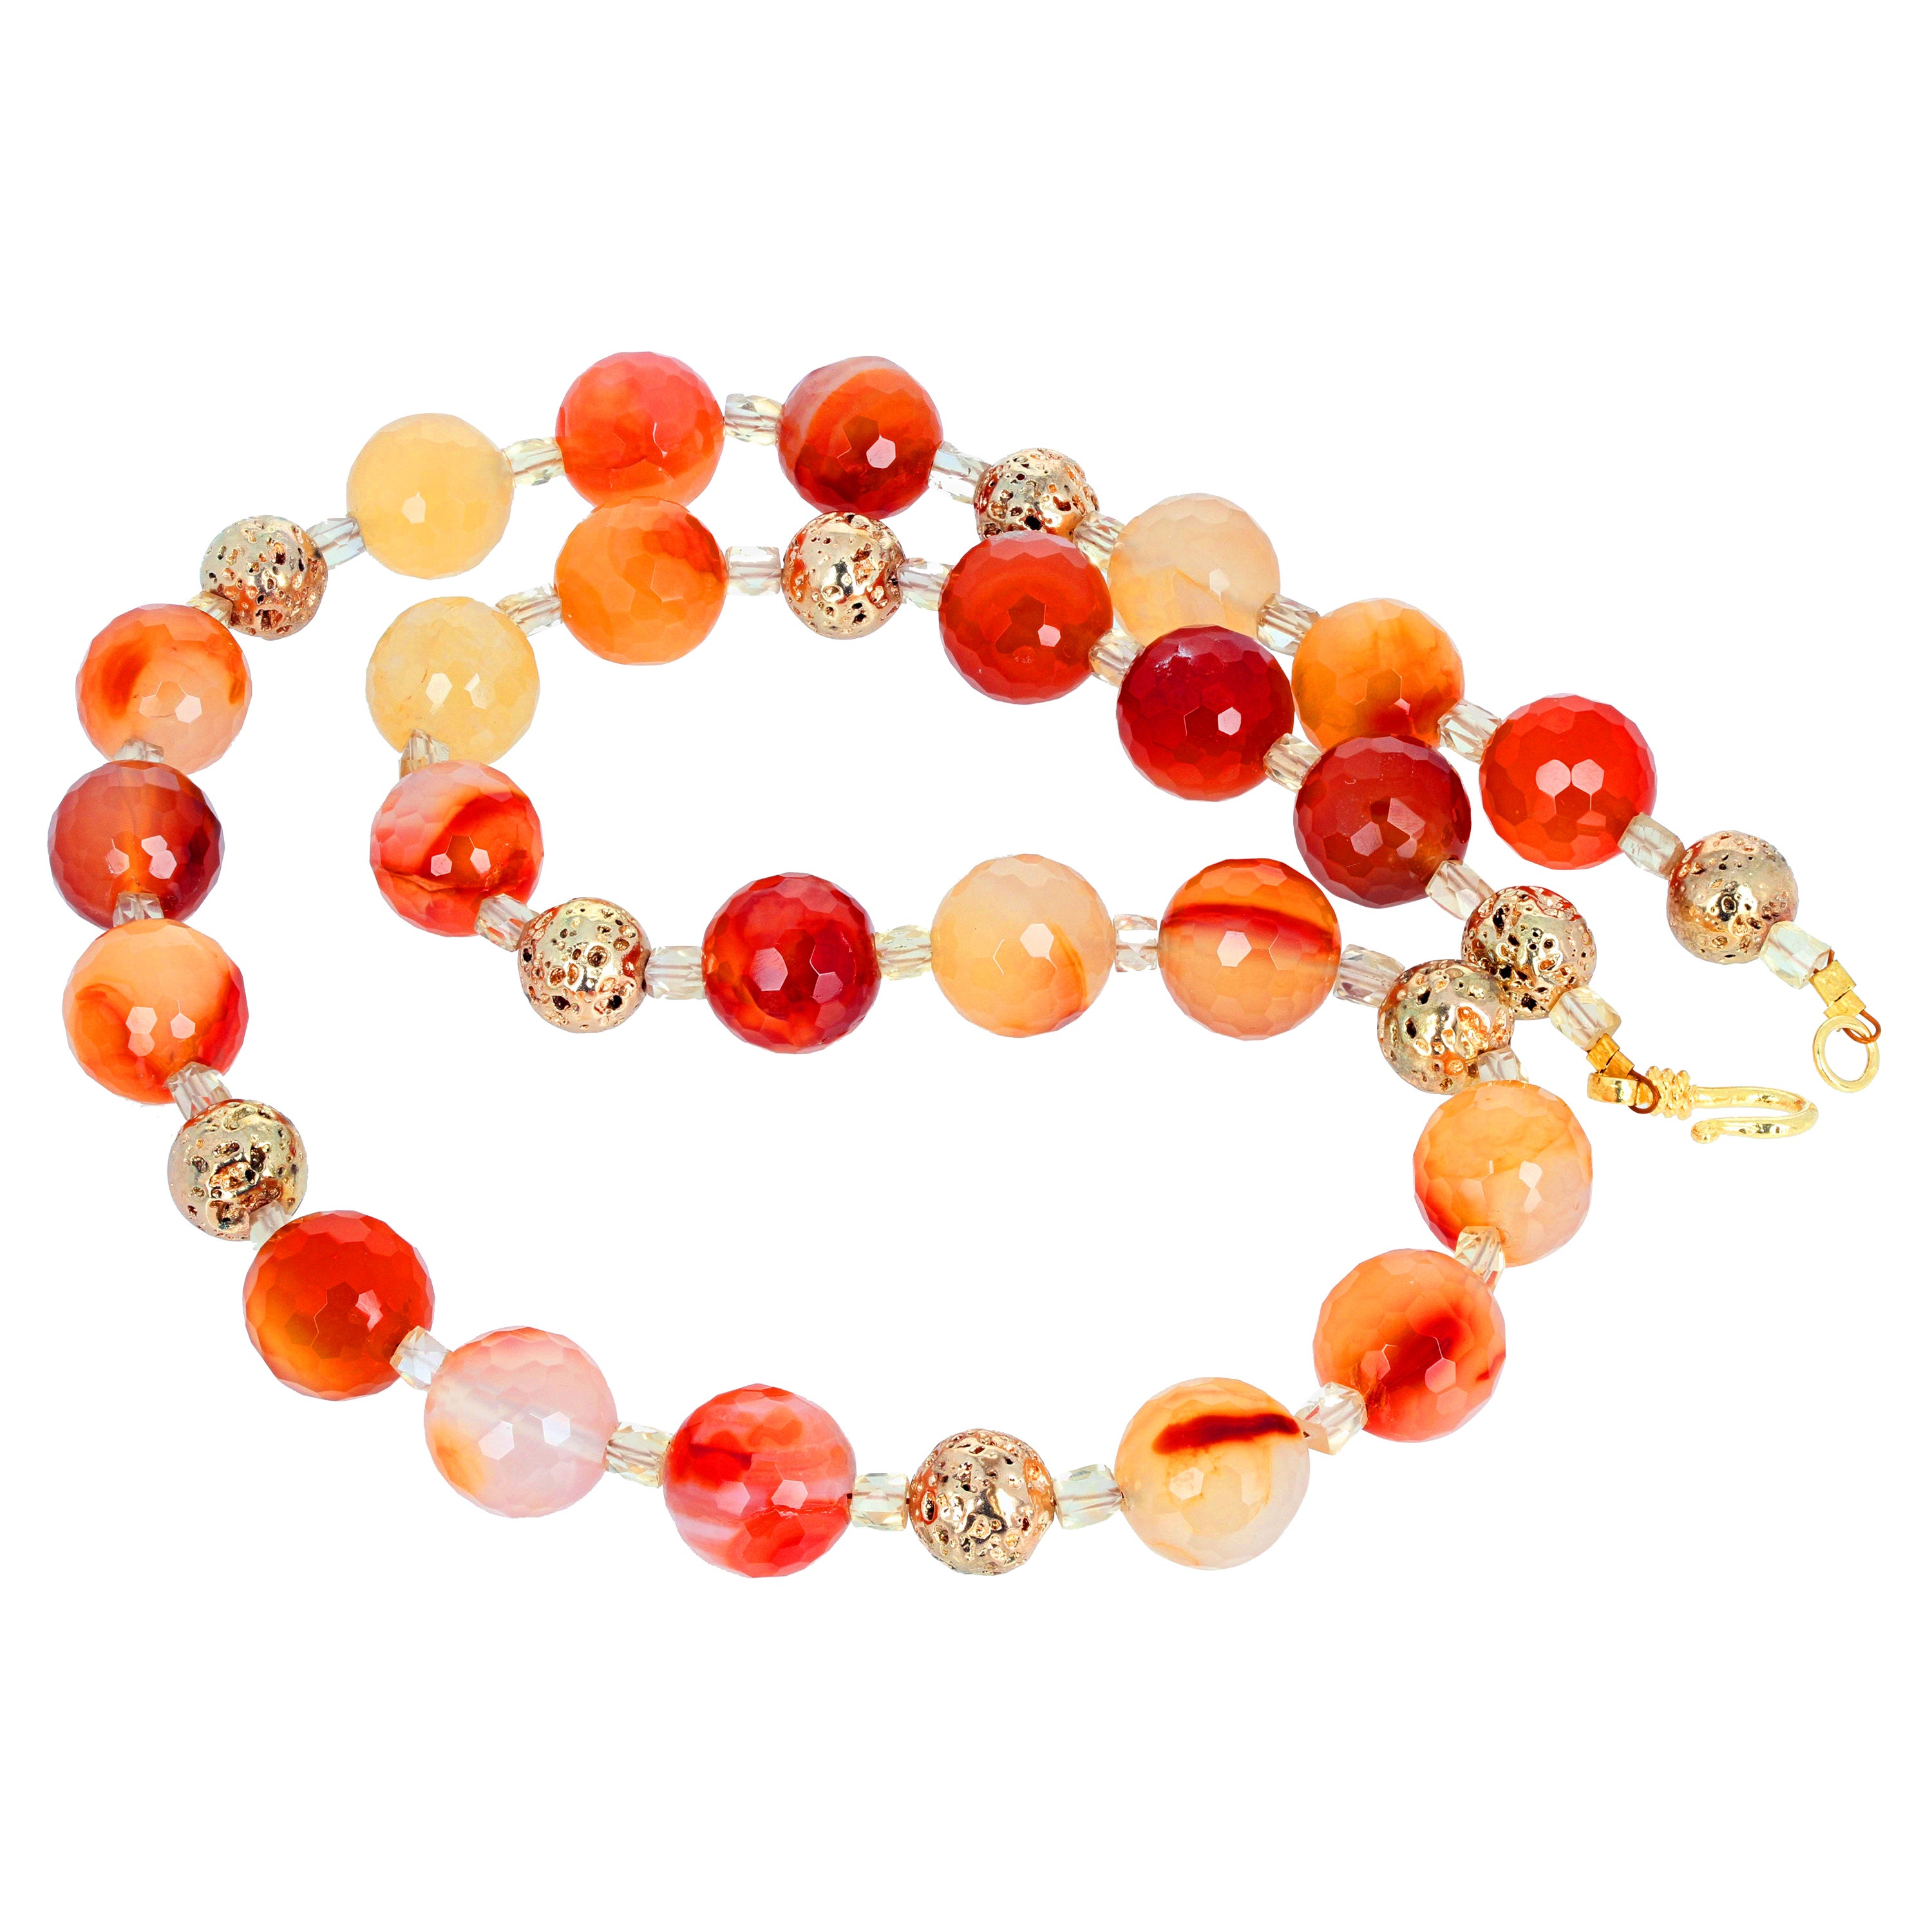 AJD Natural Glistening Fire Agate & Real Citrine 23 1/2" Necklace